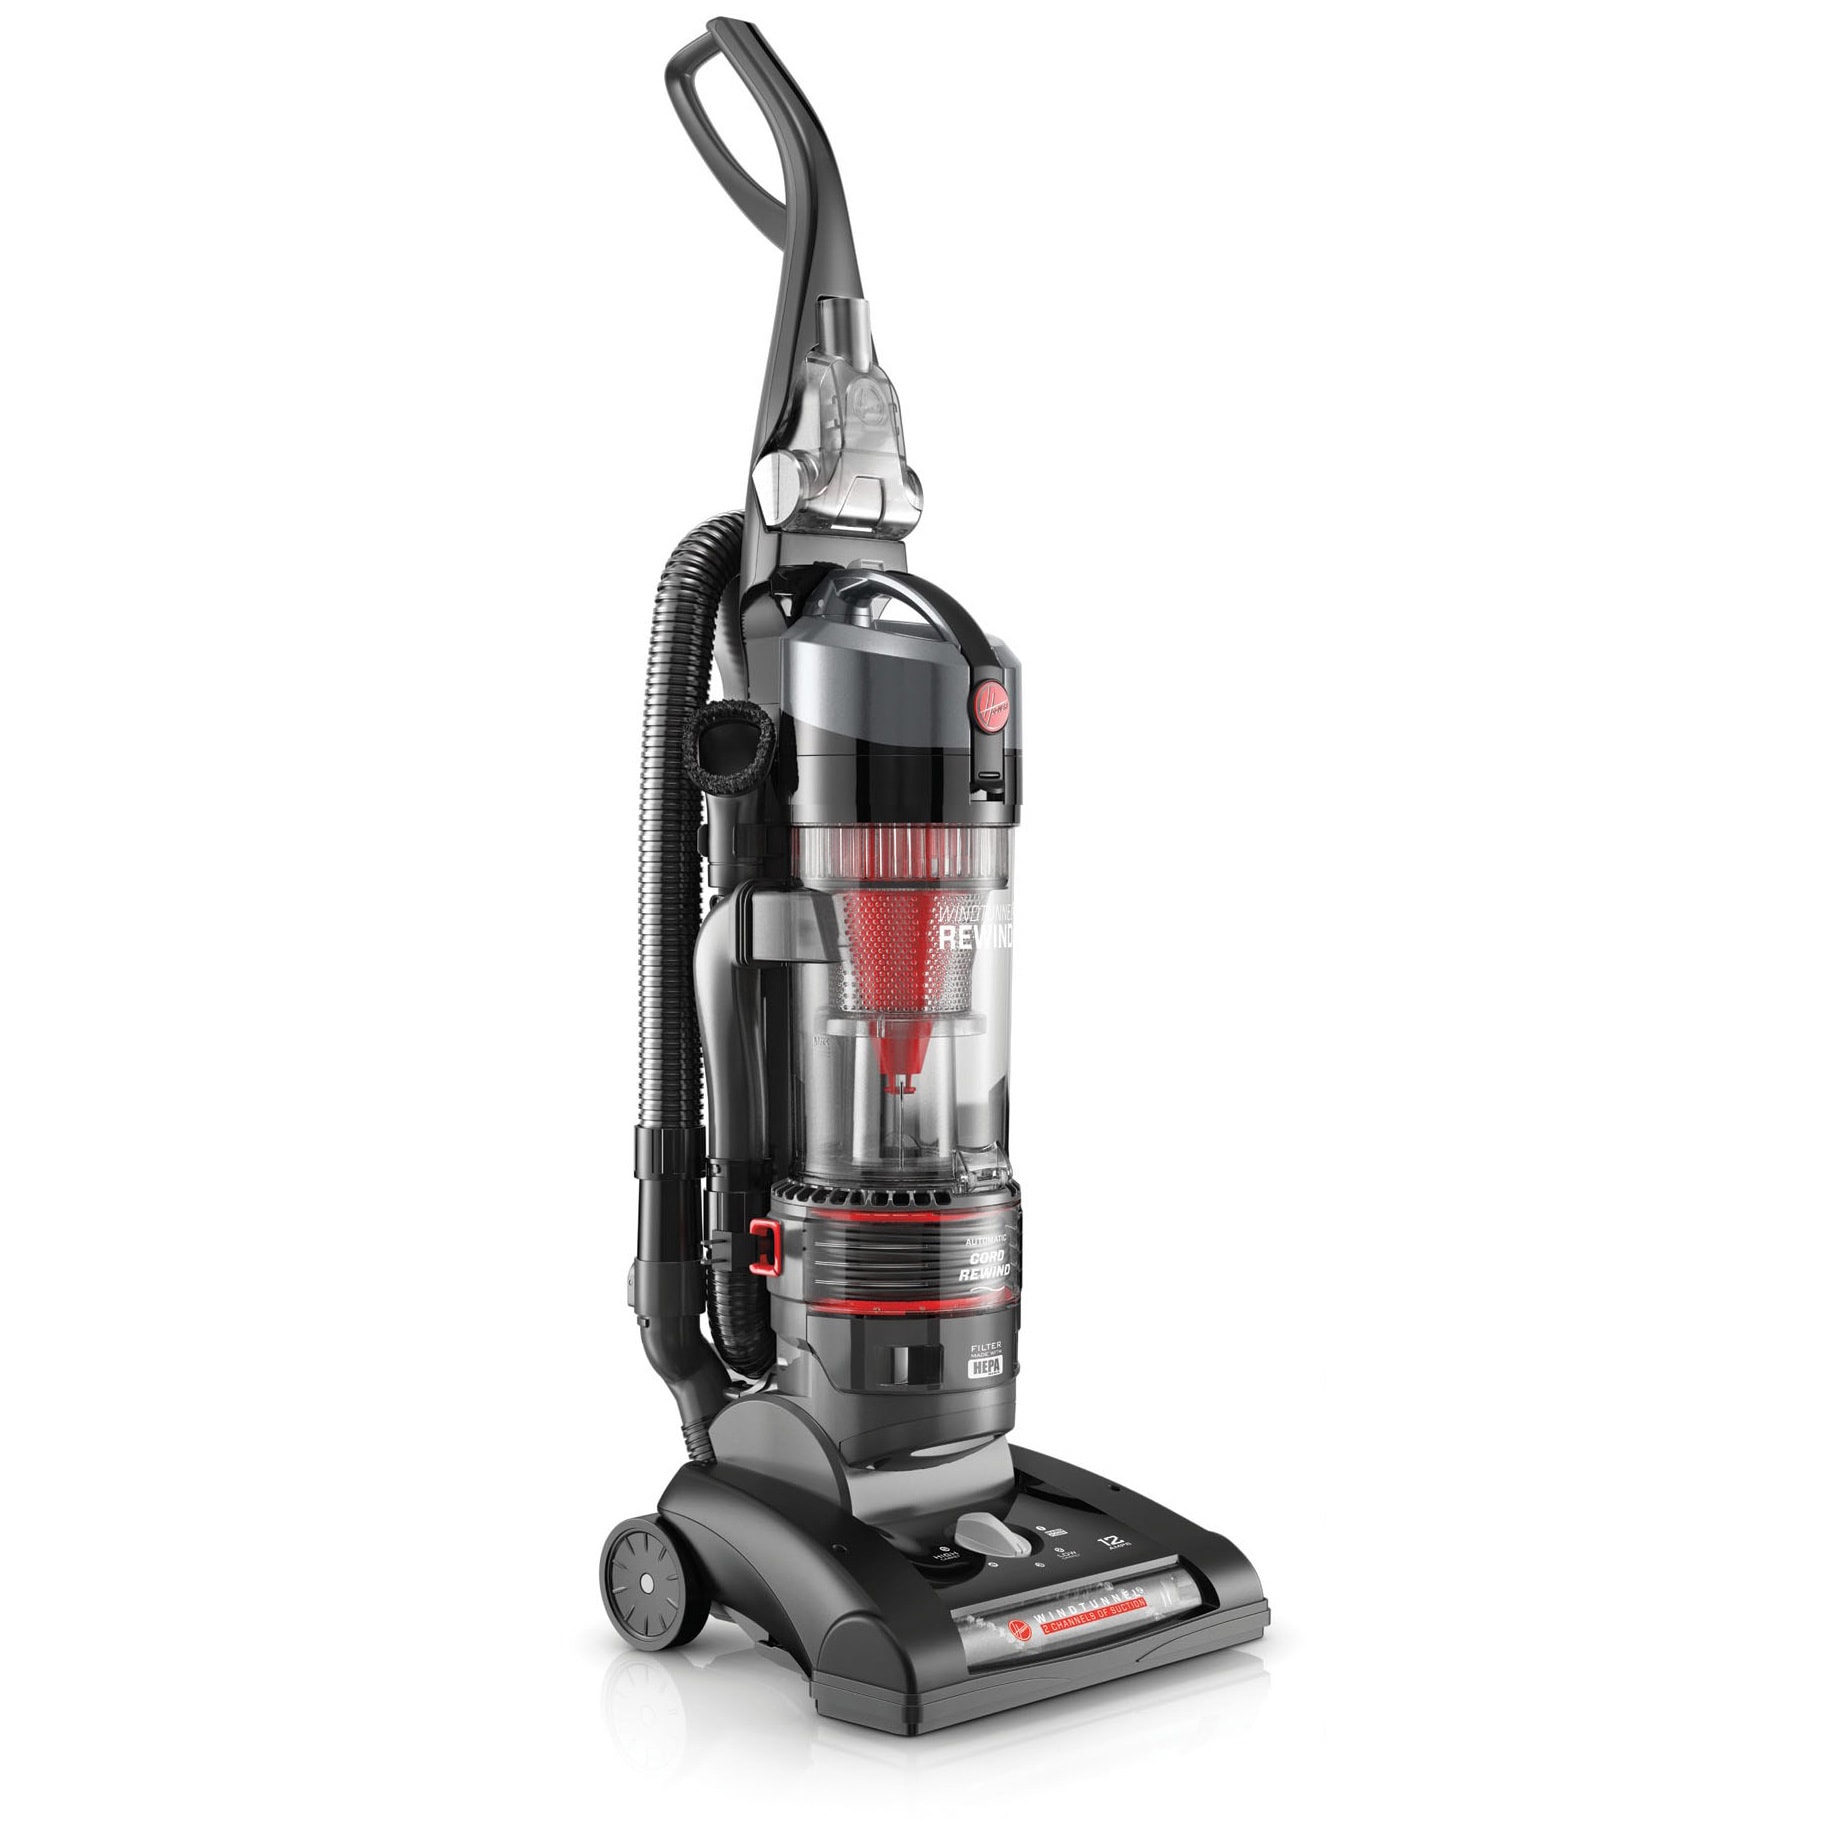 Hoover UH70821PC WindTunnel 2 Rewind Bagless Upright Vacuum Cleaner